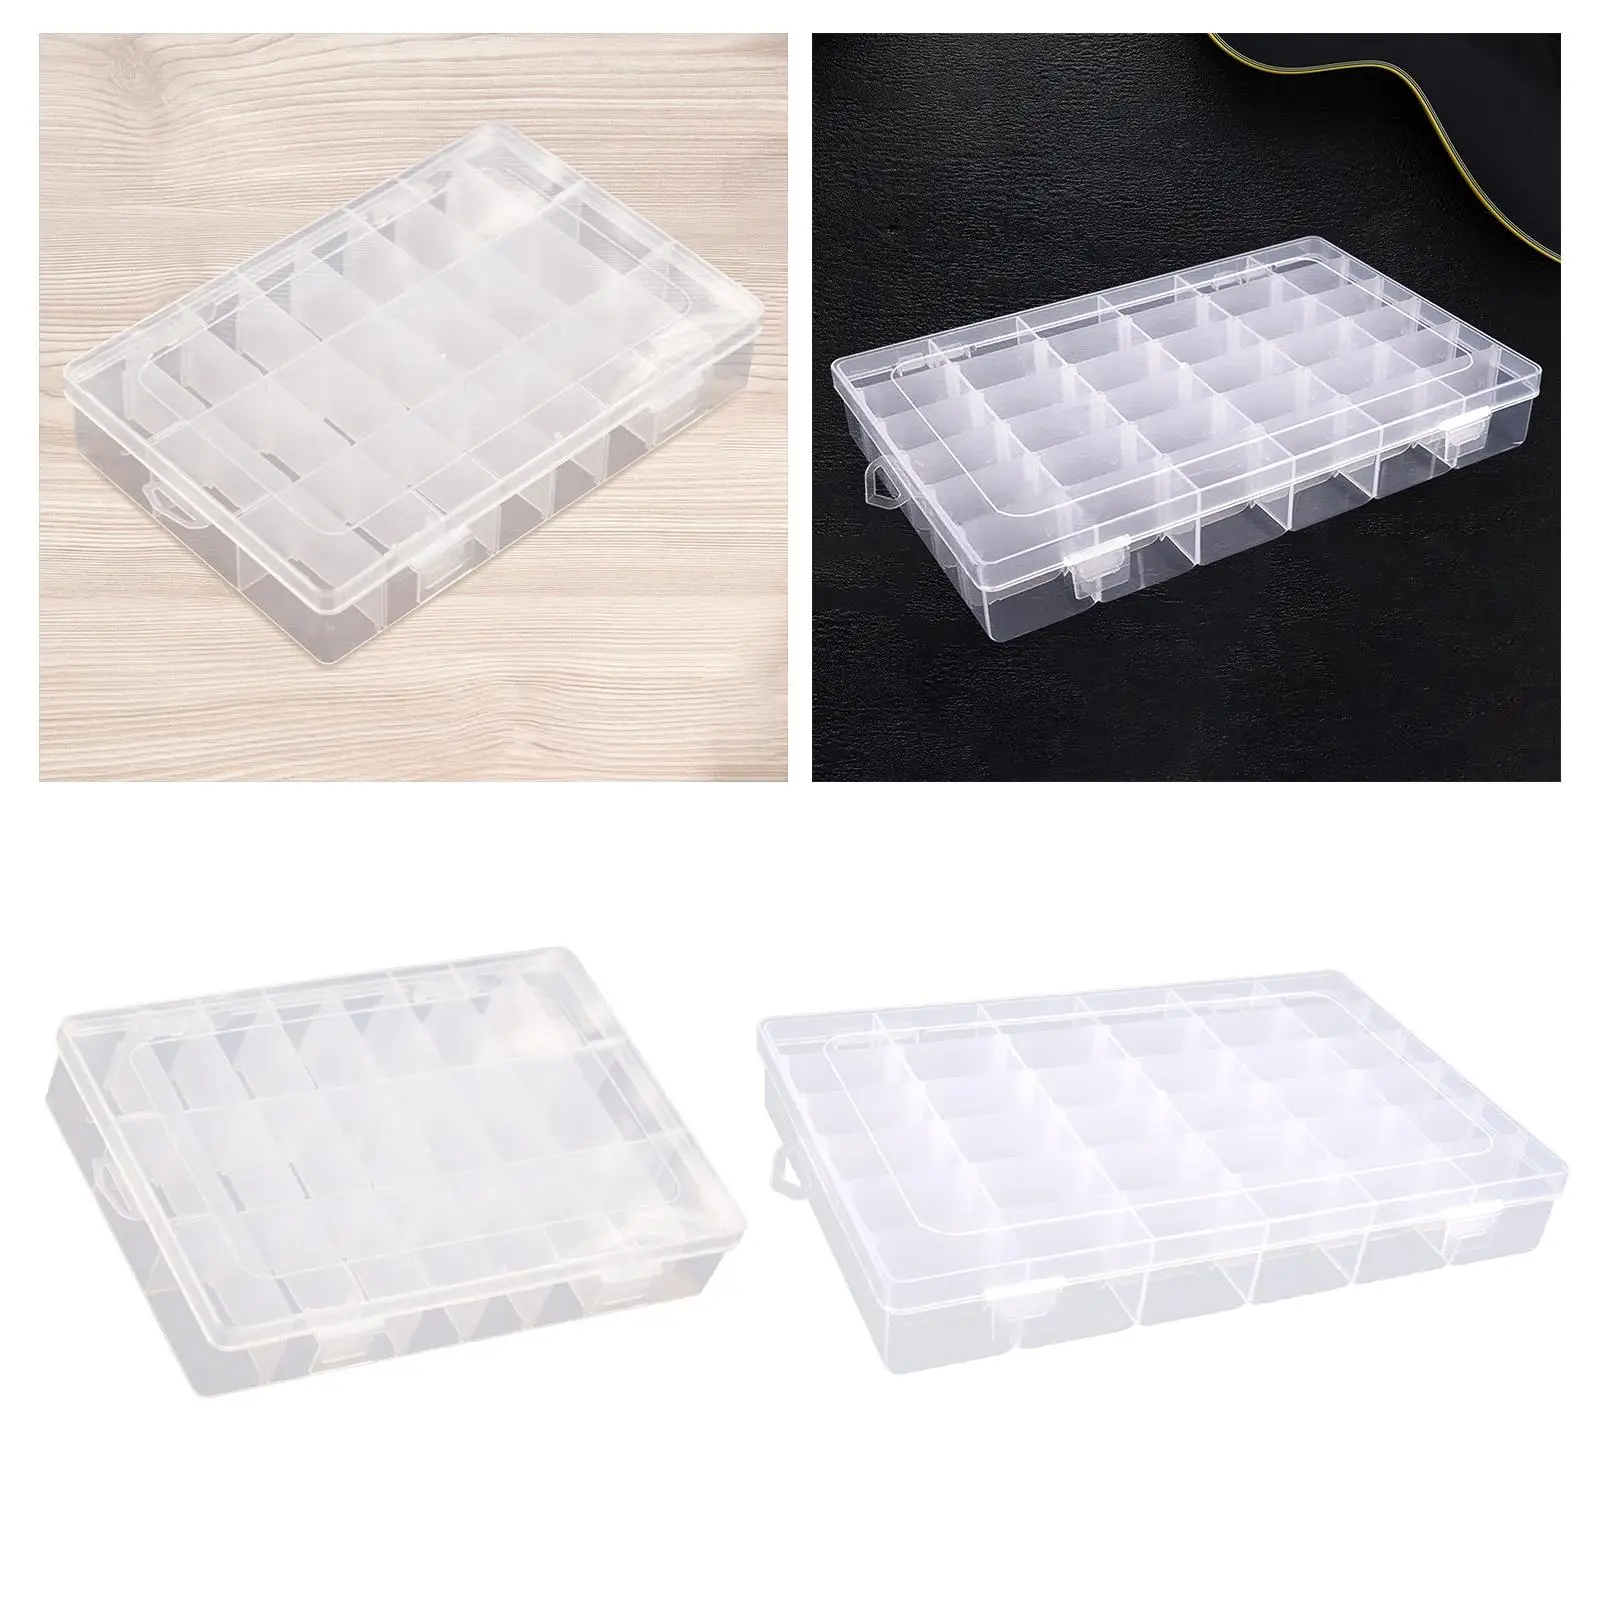 Sewing Thread Storage Box Organizer Embroidery Grids Sewing Thread Holder for Fishing Tackles Jewelry Embroidery Threads Beads